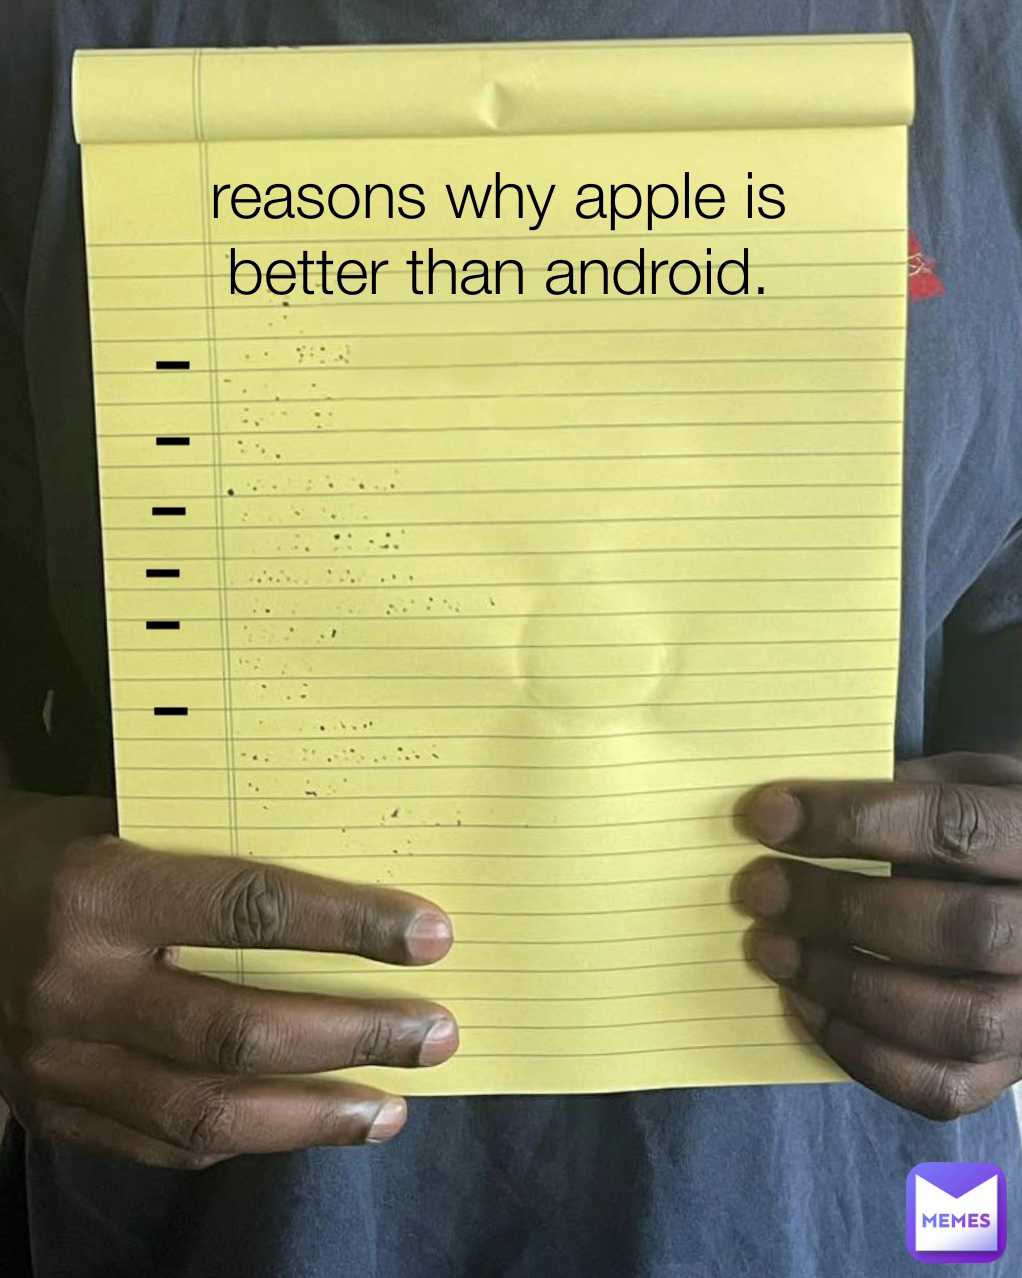 - - - - - - reasons why apple is better than android.
